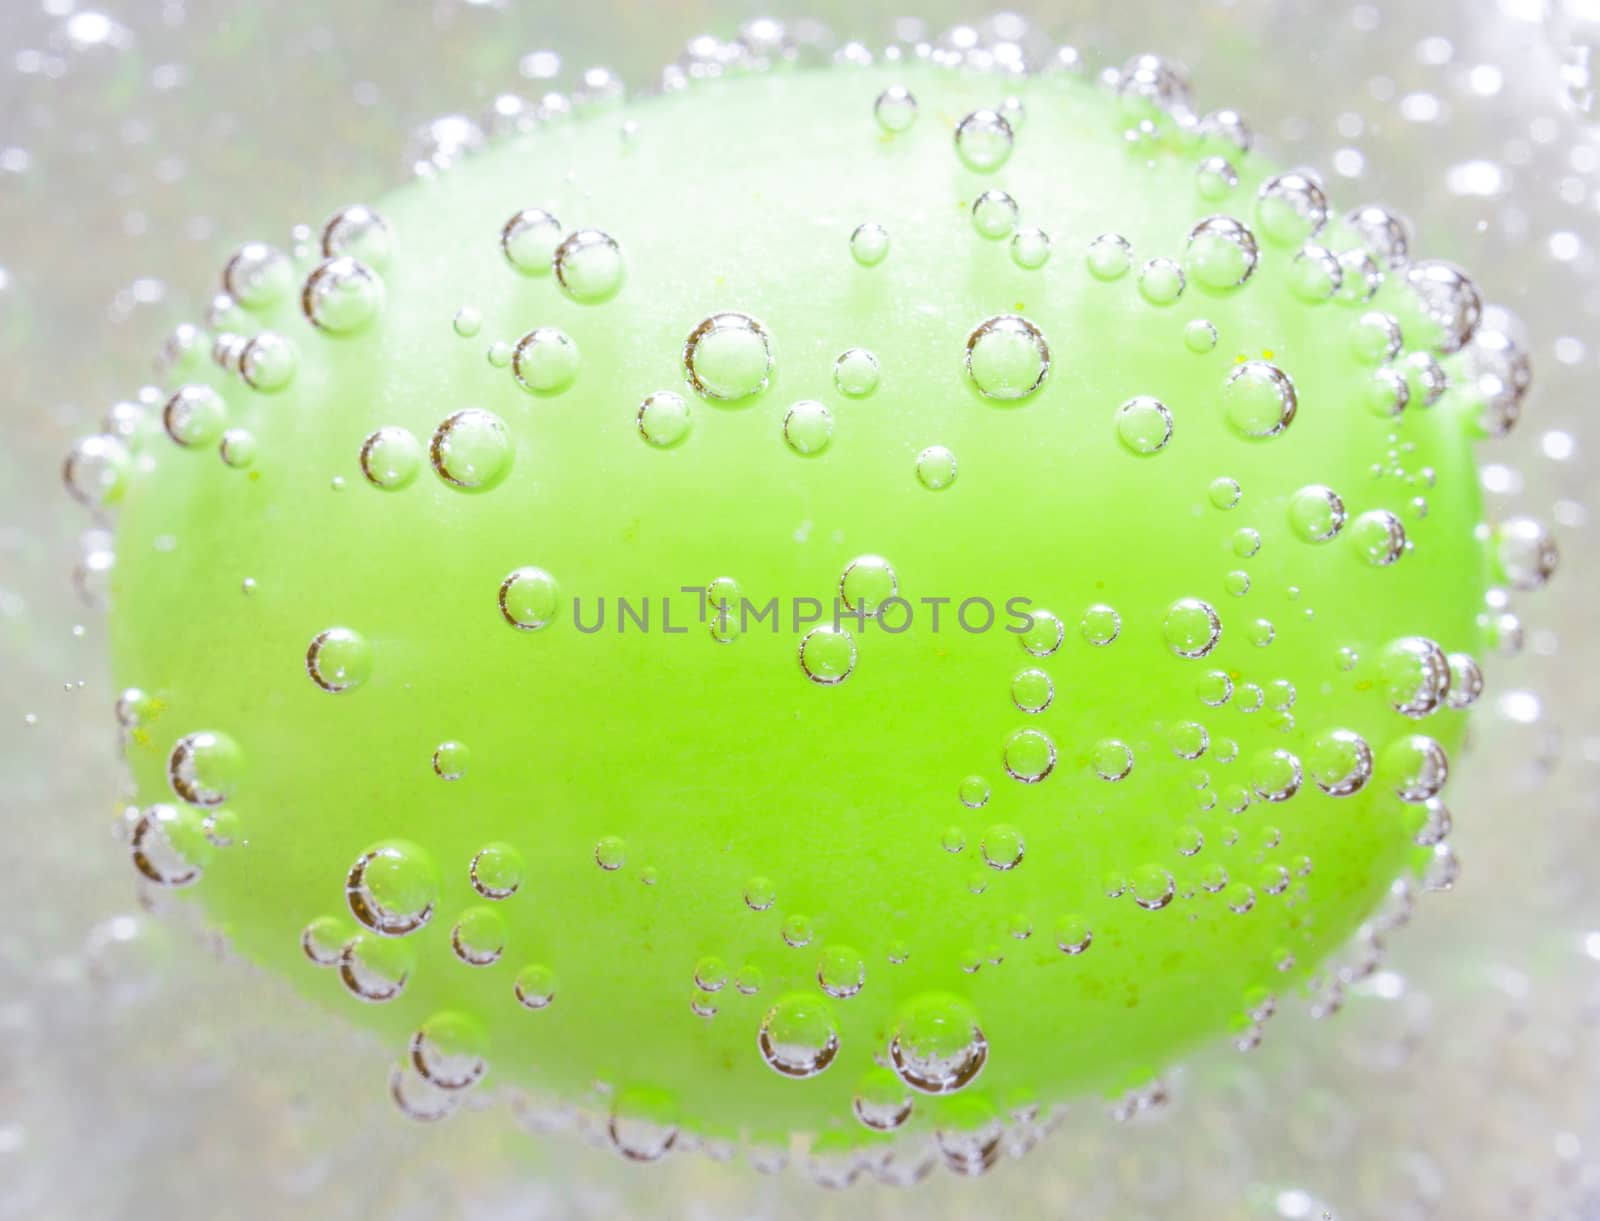 The photo depicts the grapes in the bubbles